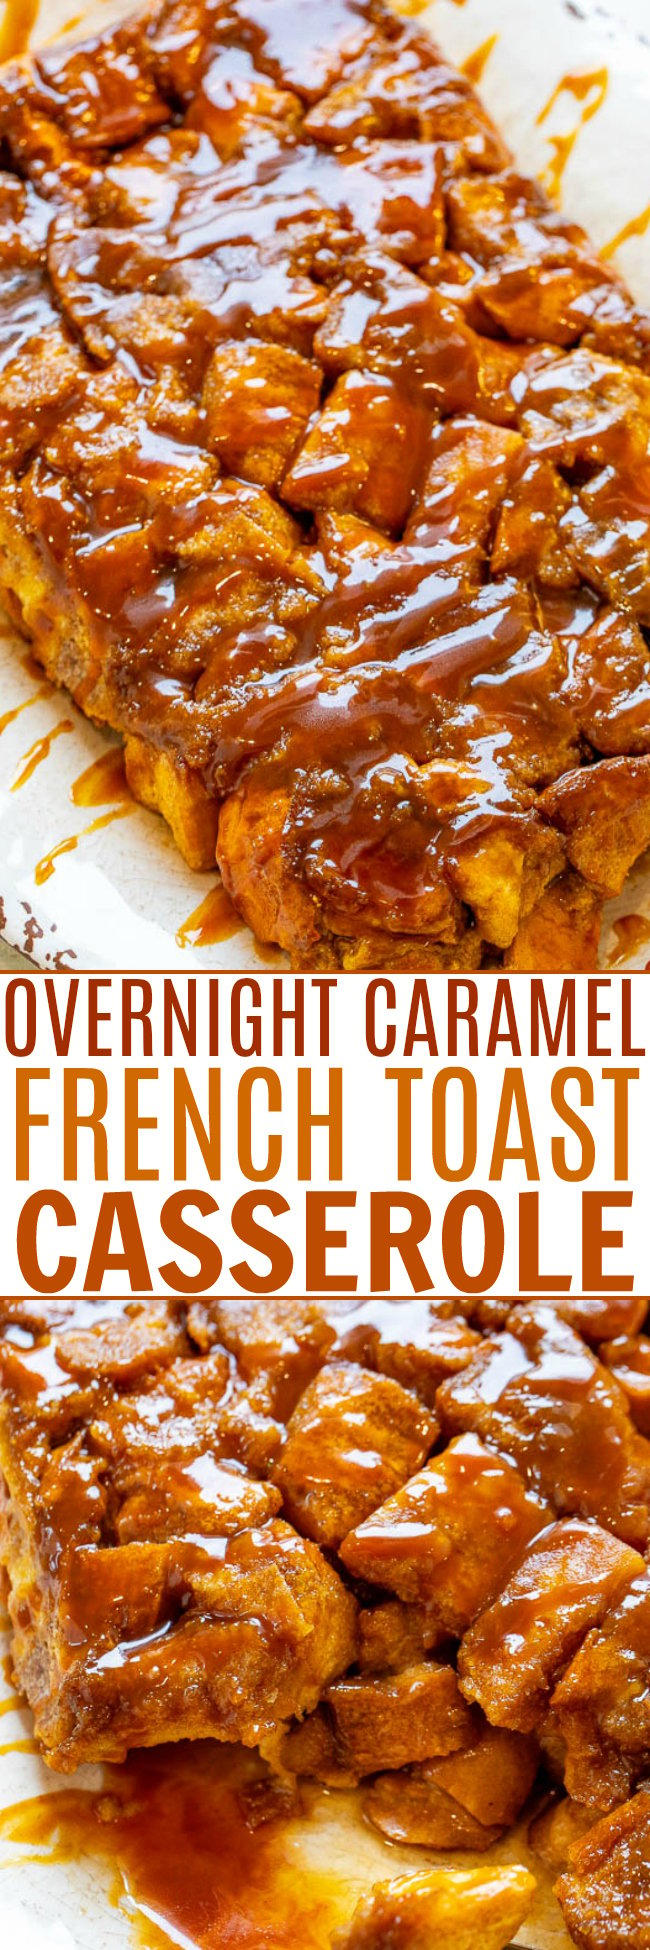 Caramel Overnight French Toast Casserole - EASY, soft, tender, and decadent French toast that's coated in caramel sauce!! Assemble it the night before and wake up to an amazing breakfast or brunch that everyone will ADORE!!